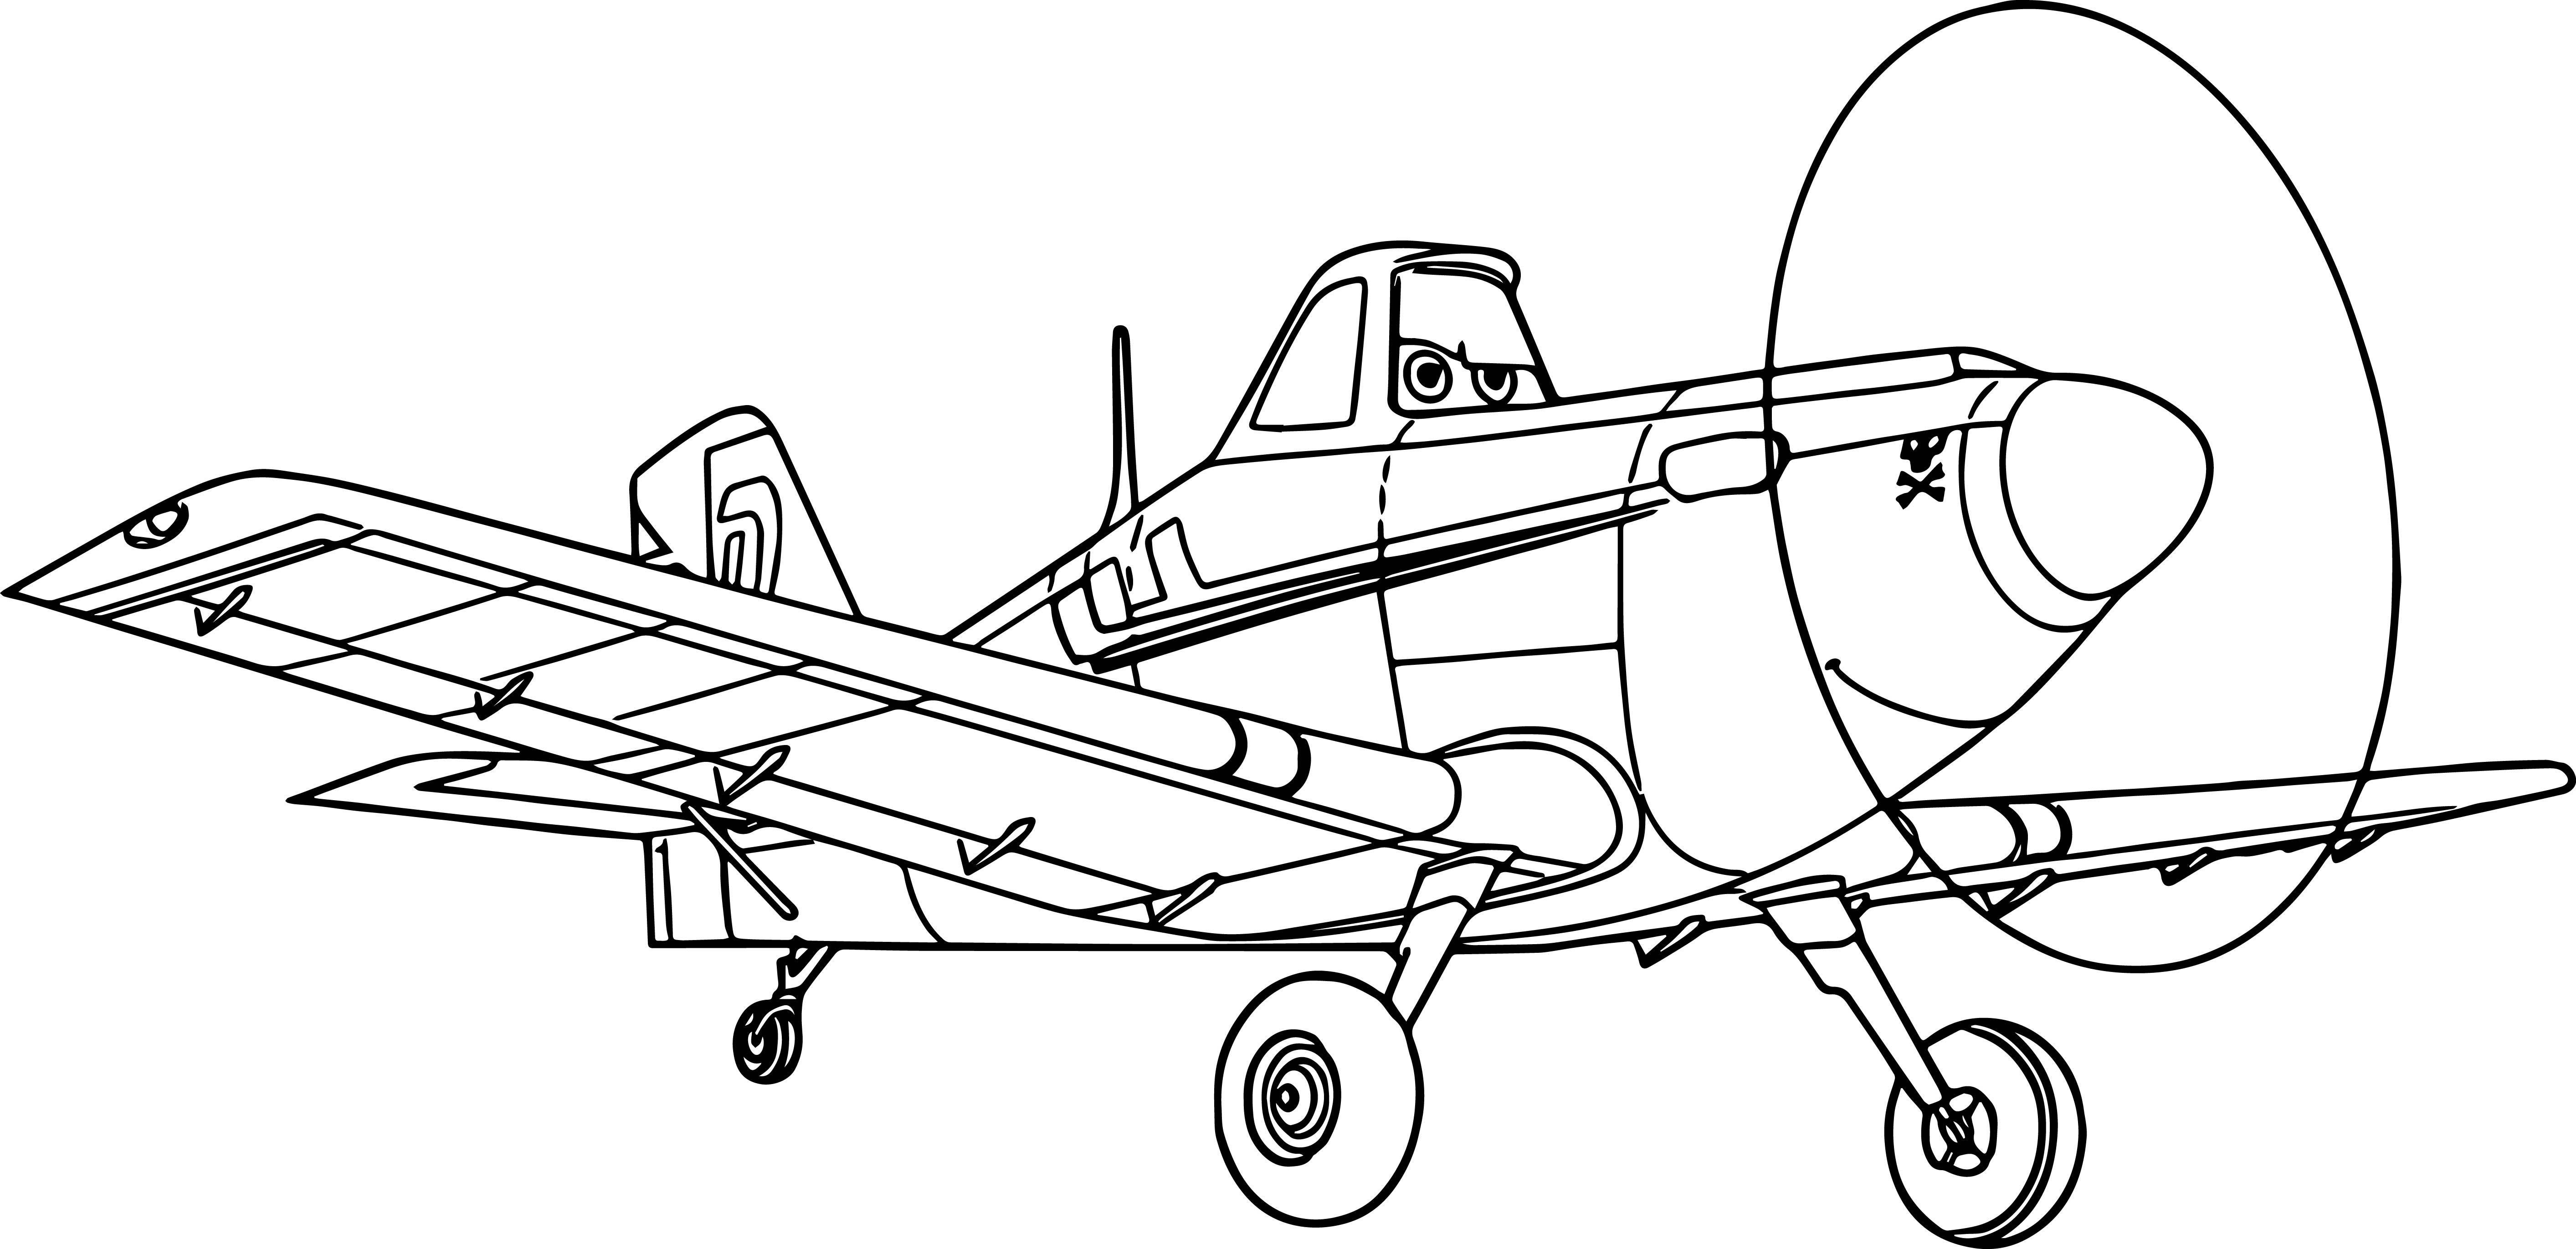 Ww2 Airplane Coloring Pages At GetDrawings | Free Download - Coloring Home